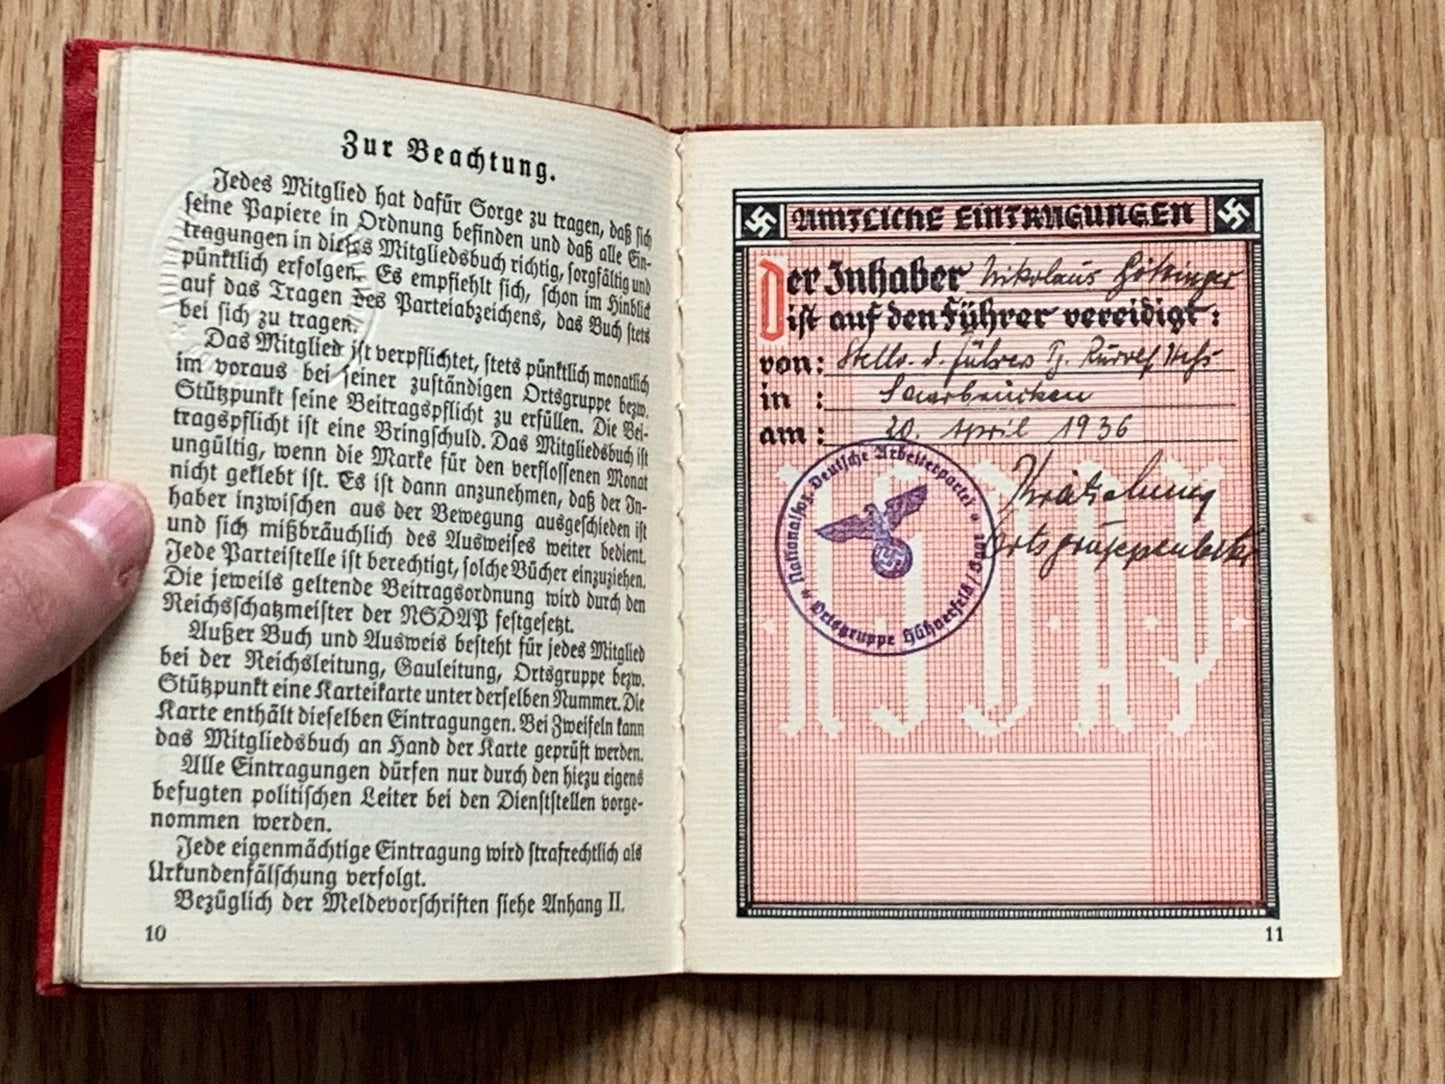 NSDAP membership booklet - Blockleiter official, Rudolf Hess reference